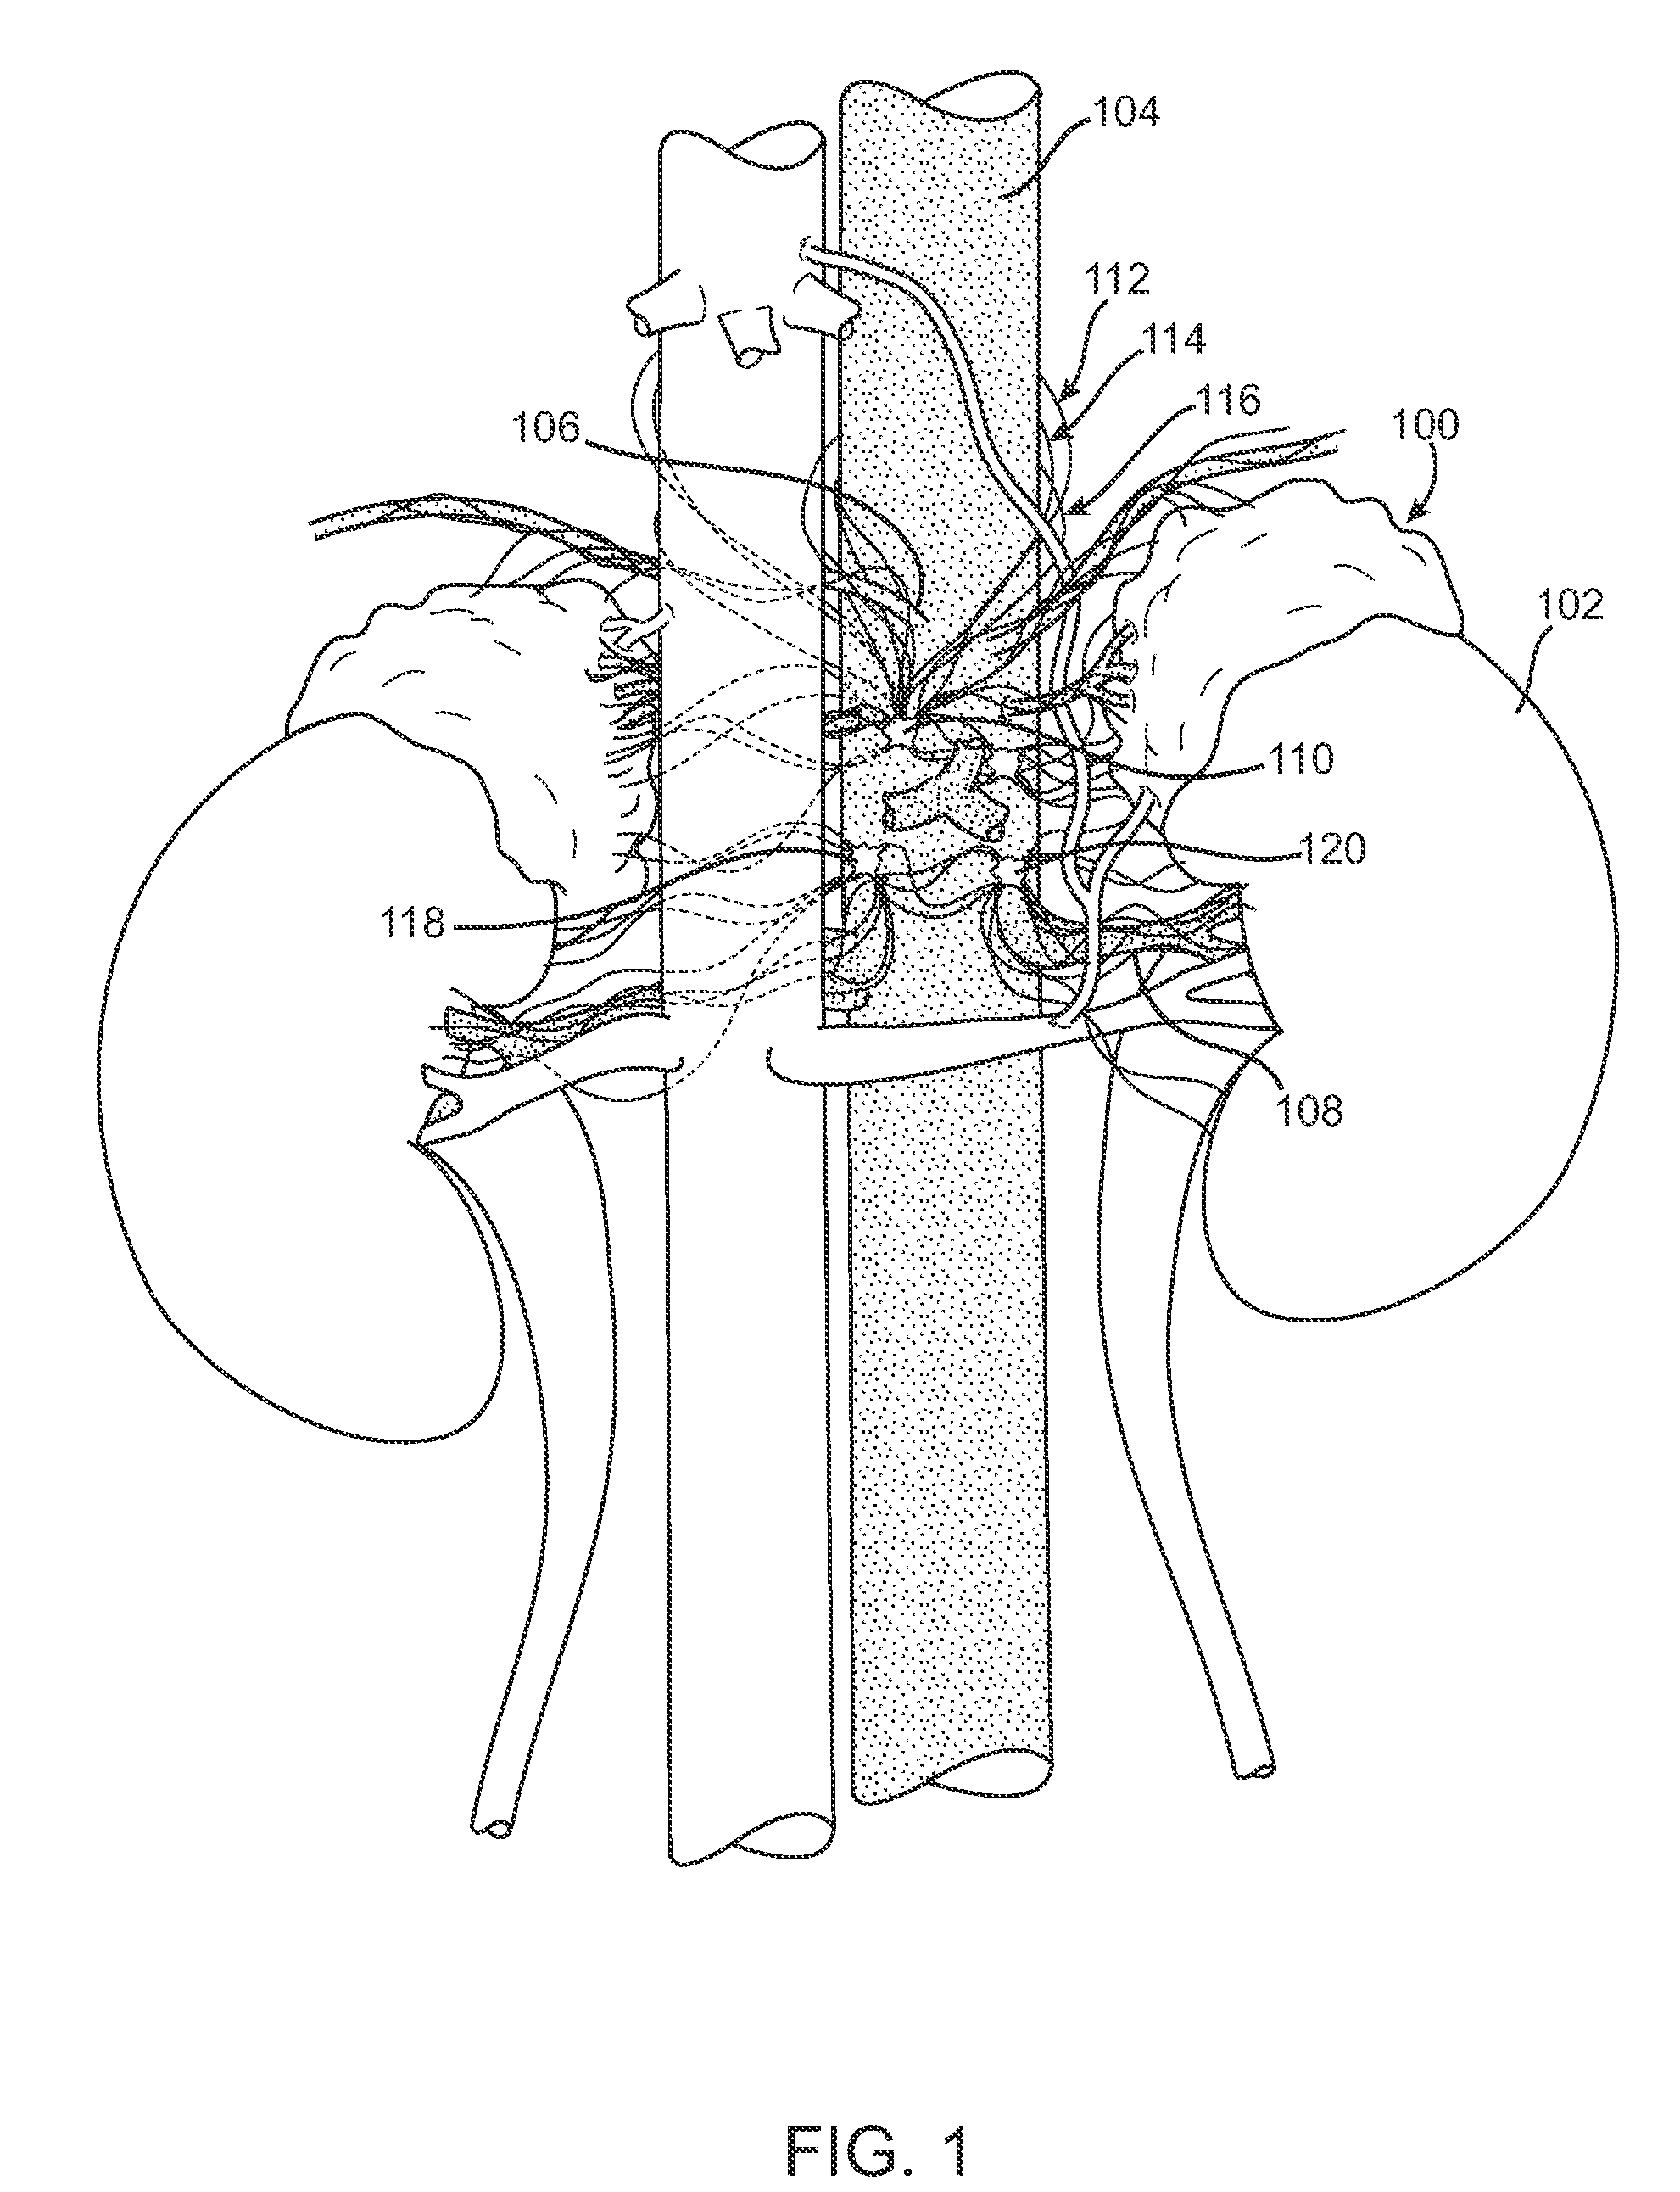 Method and Devices for Adrenal Stimulation